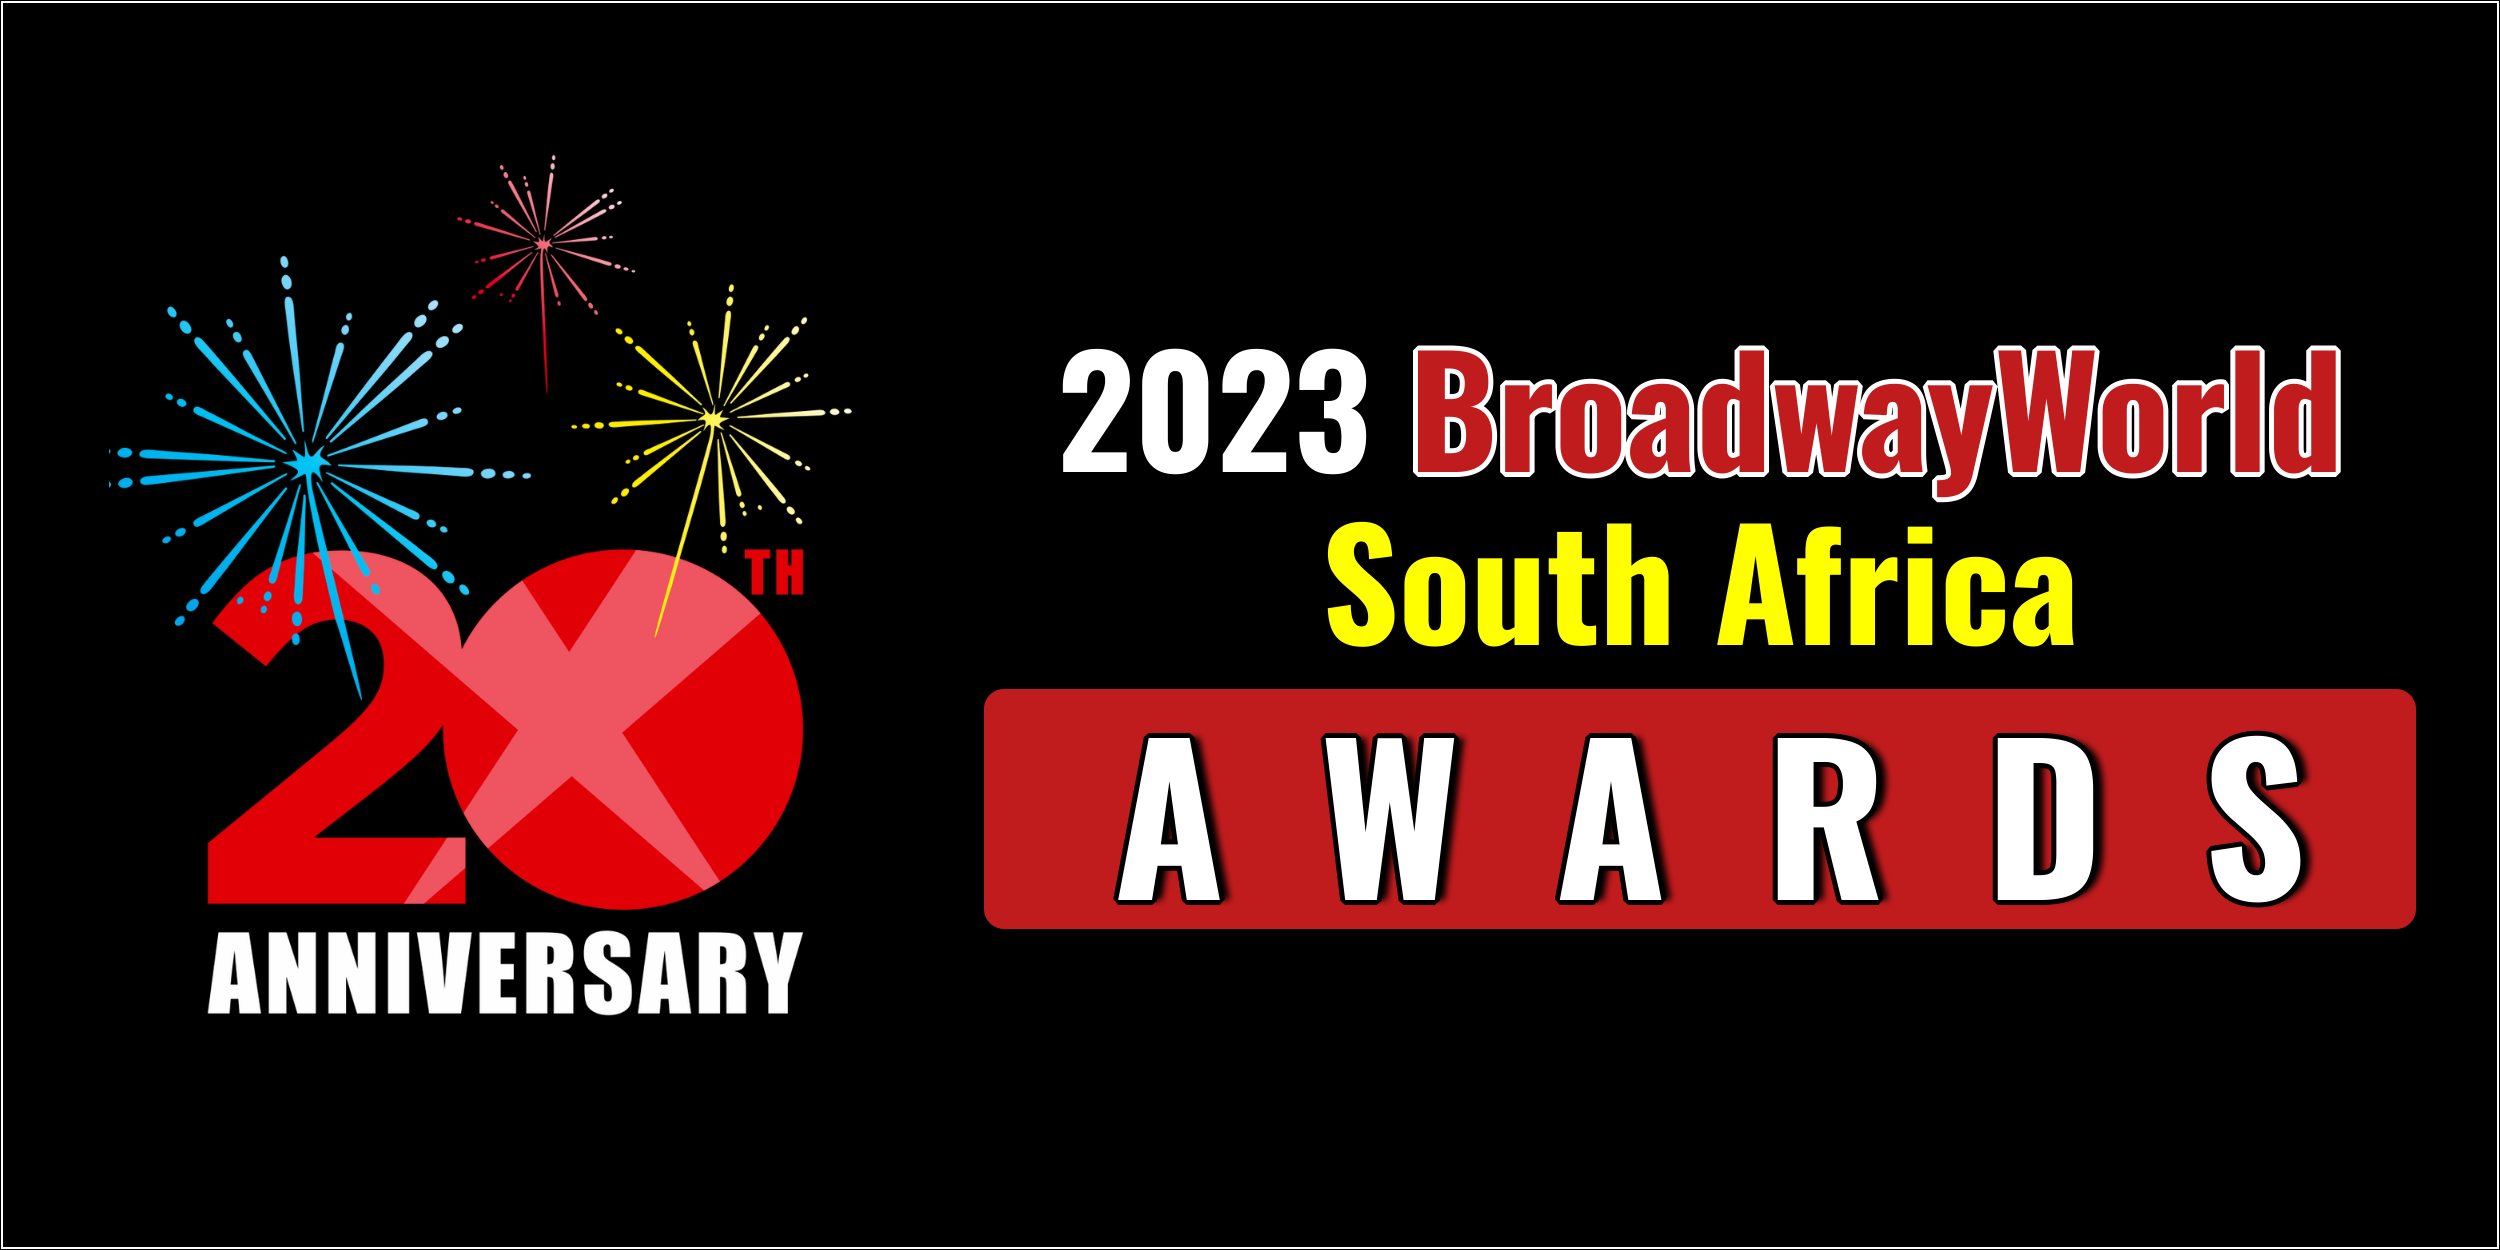 Latest Standings Announced For The 2023 BroadwayWorld South Africa Awards; A MIDSUMMER NIGHT'S DREAM Leads Best Play!